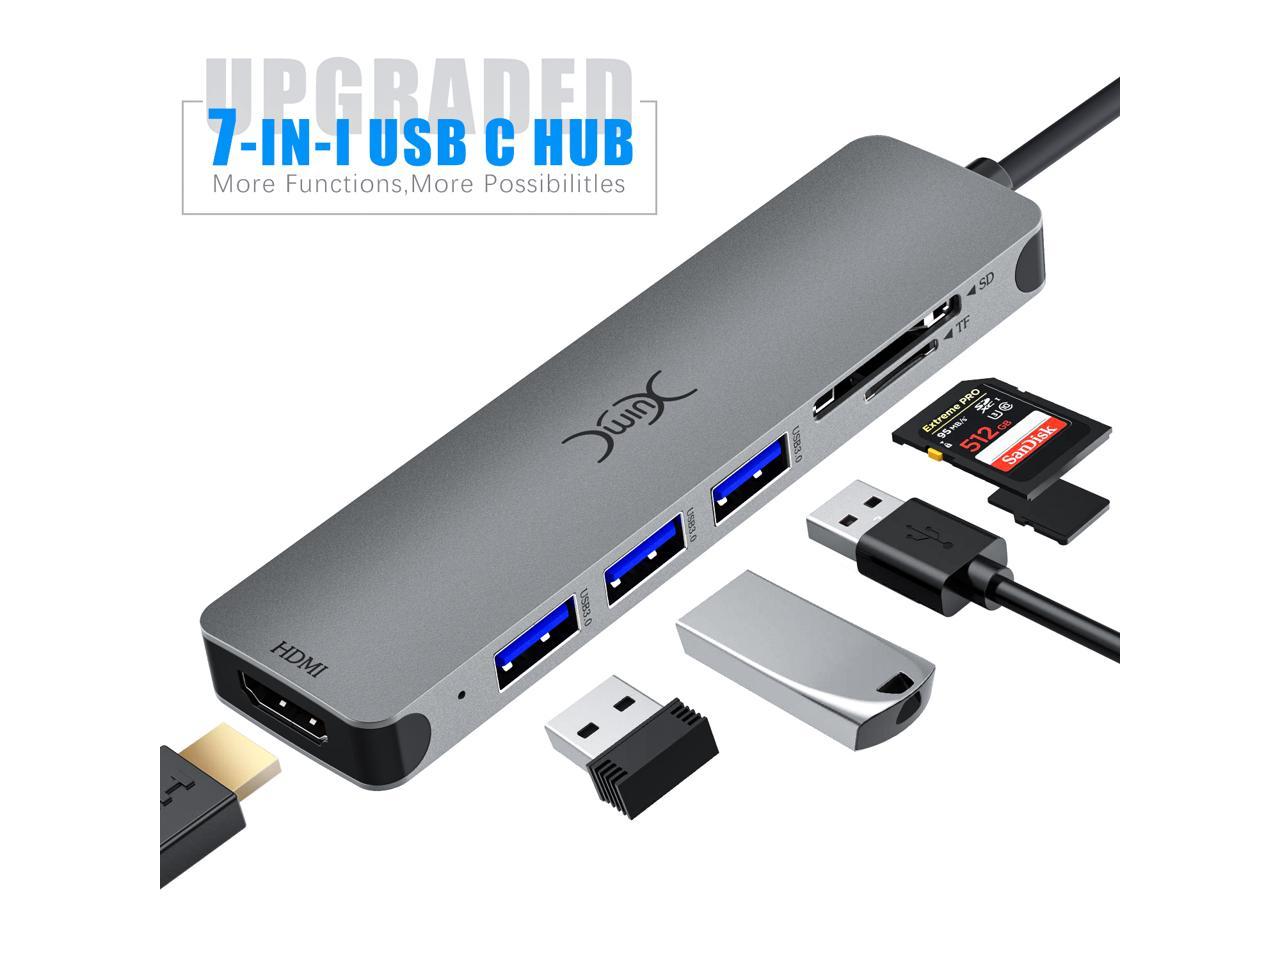 Black QacQoc USB C Hub HDMI Adapter with 3 USB 3.0 Ports SD/TF Card Reader Aluminum USB-C Multiport Adapter for Mac/MacBook Pro and more USB-C Devices